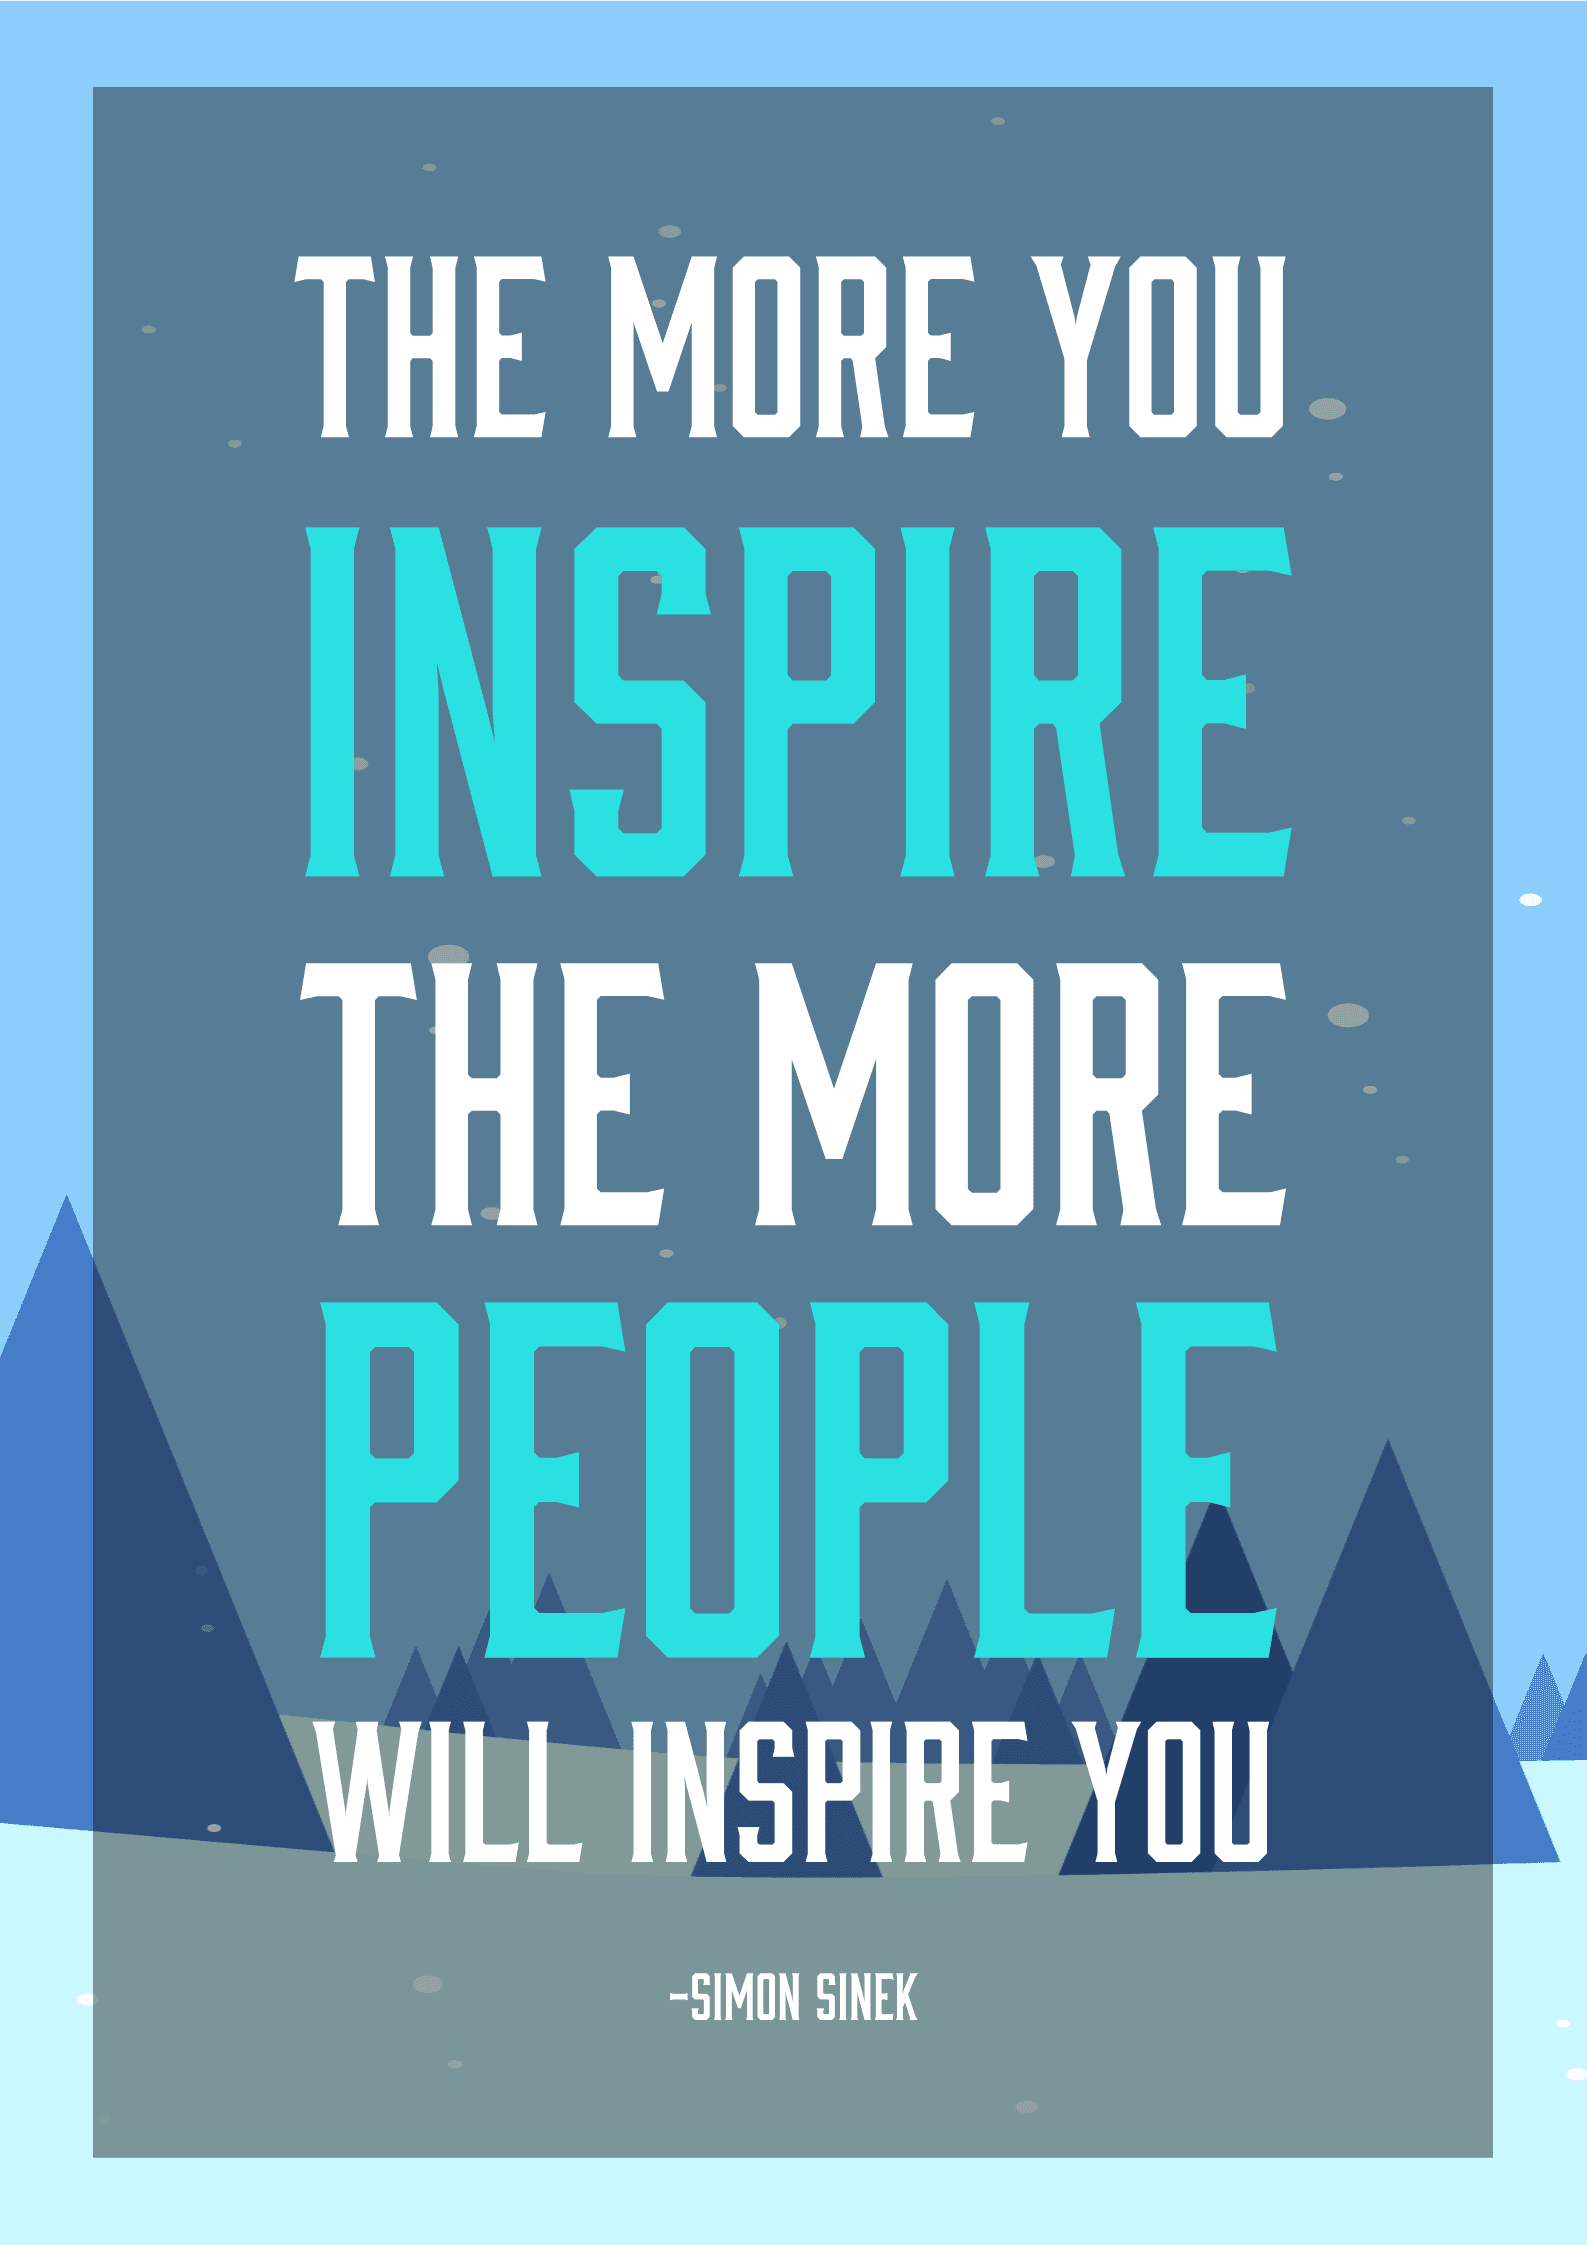 white-and-black-motivational-quote-poster-template-thumbnail-img